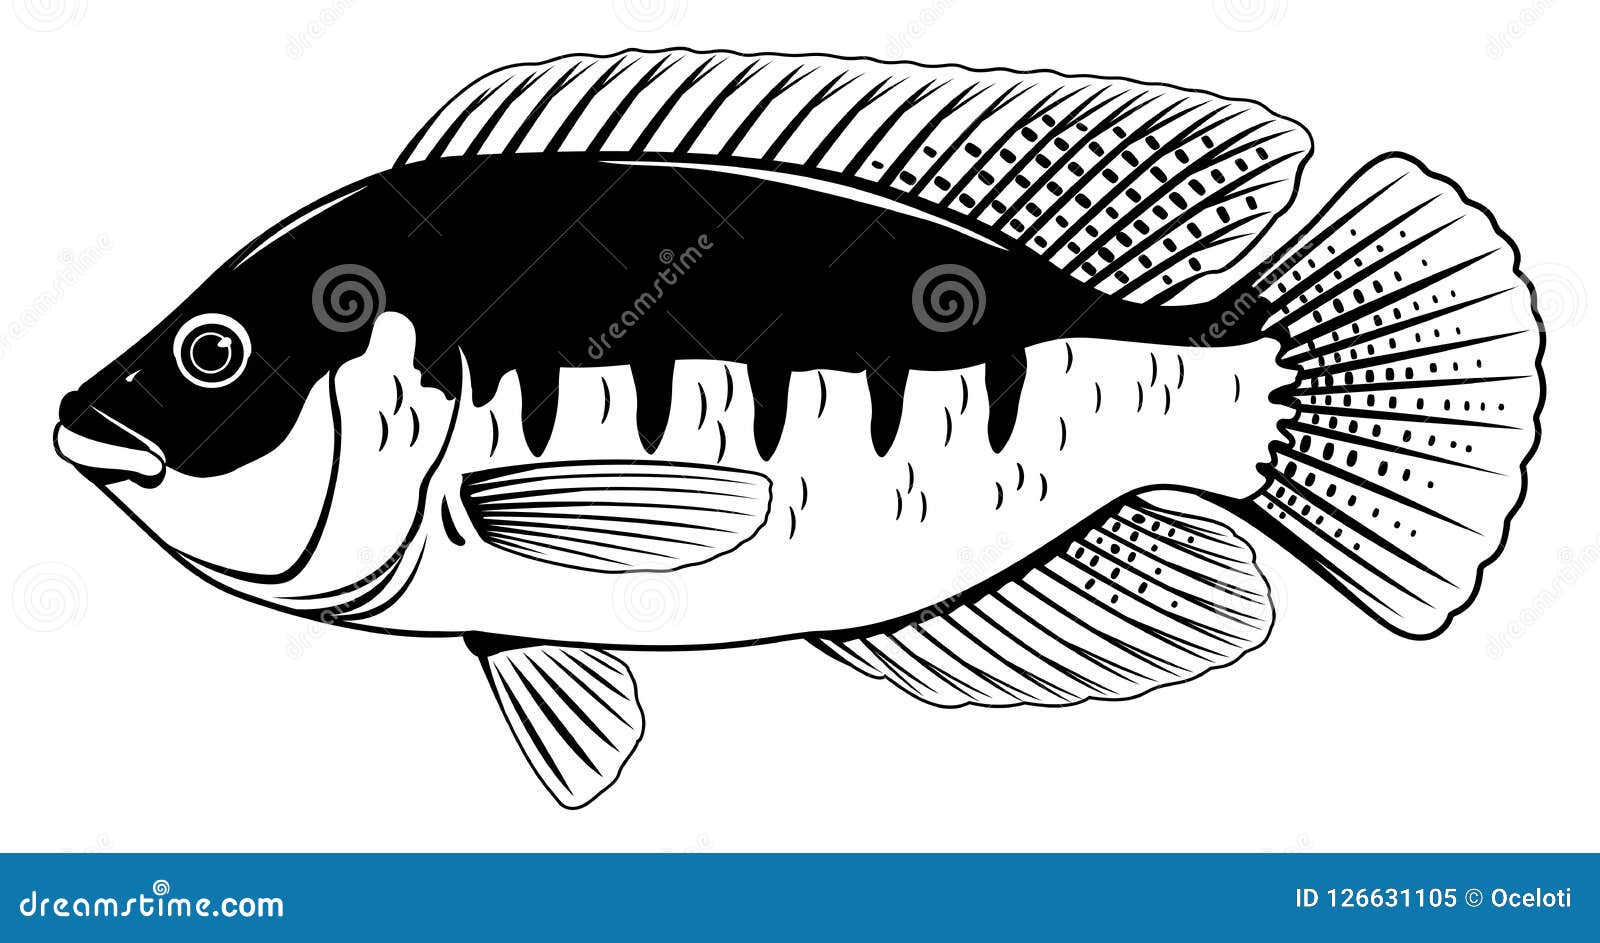 Tilapia Png Royalty Free Library - Tilapia Drawing Fish Transparent PNG -  800x600 - Free Download on NicePNG